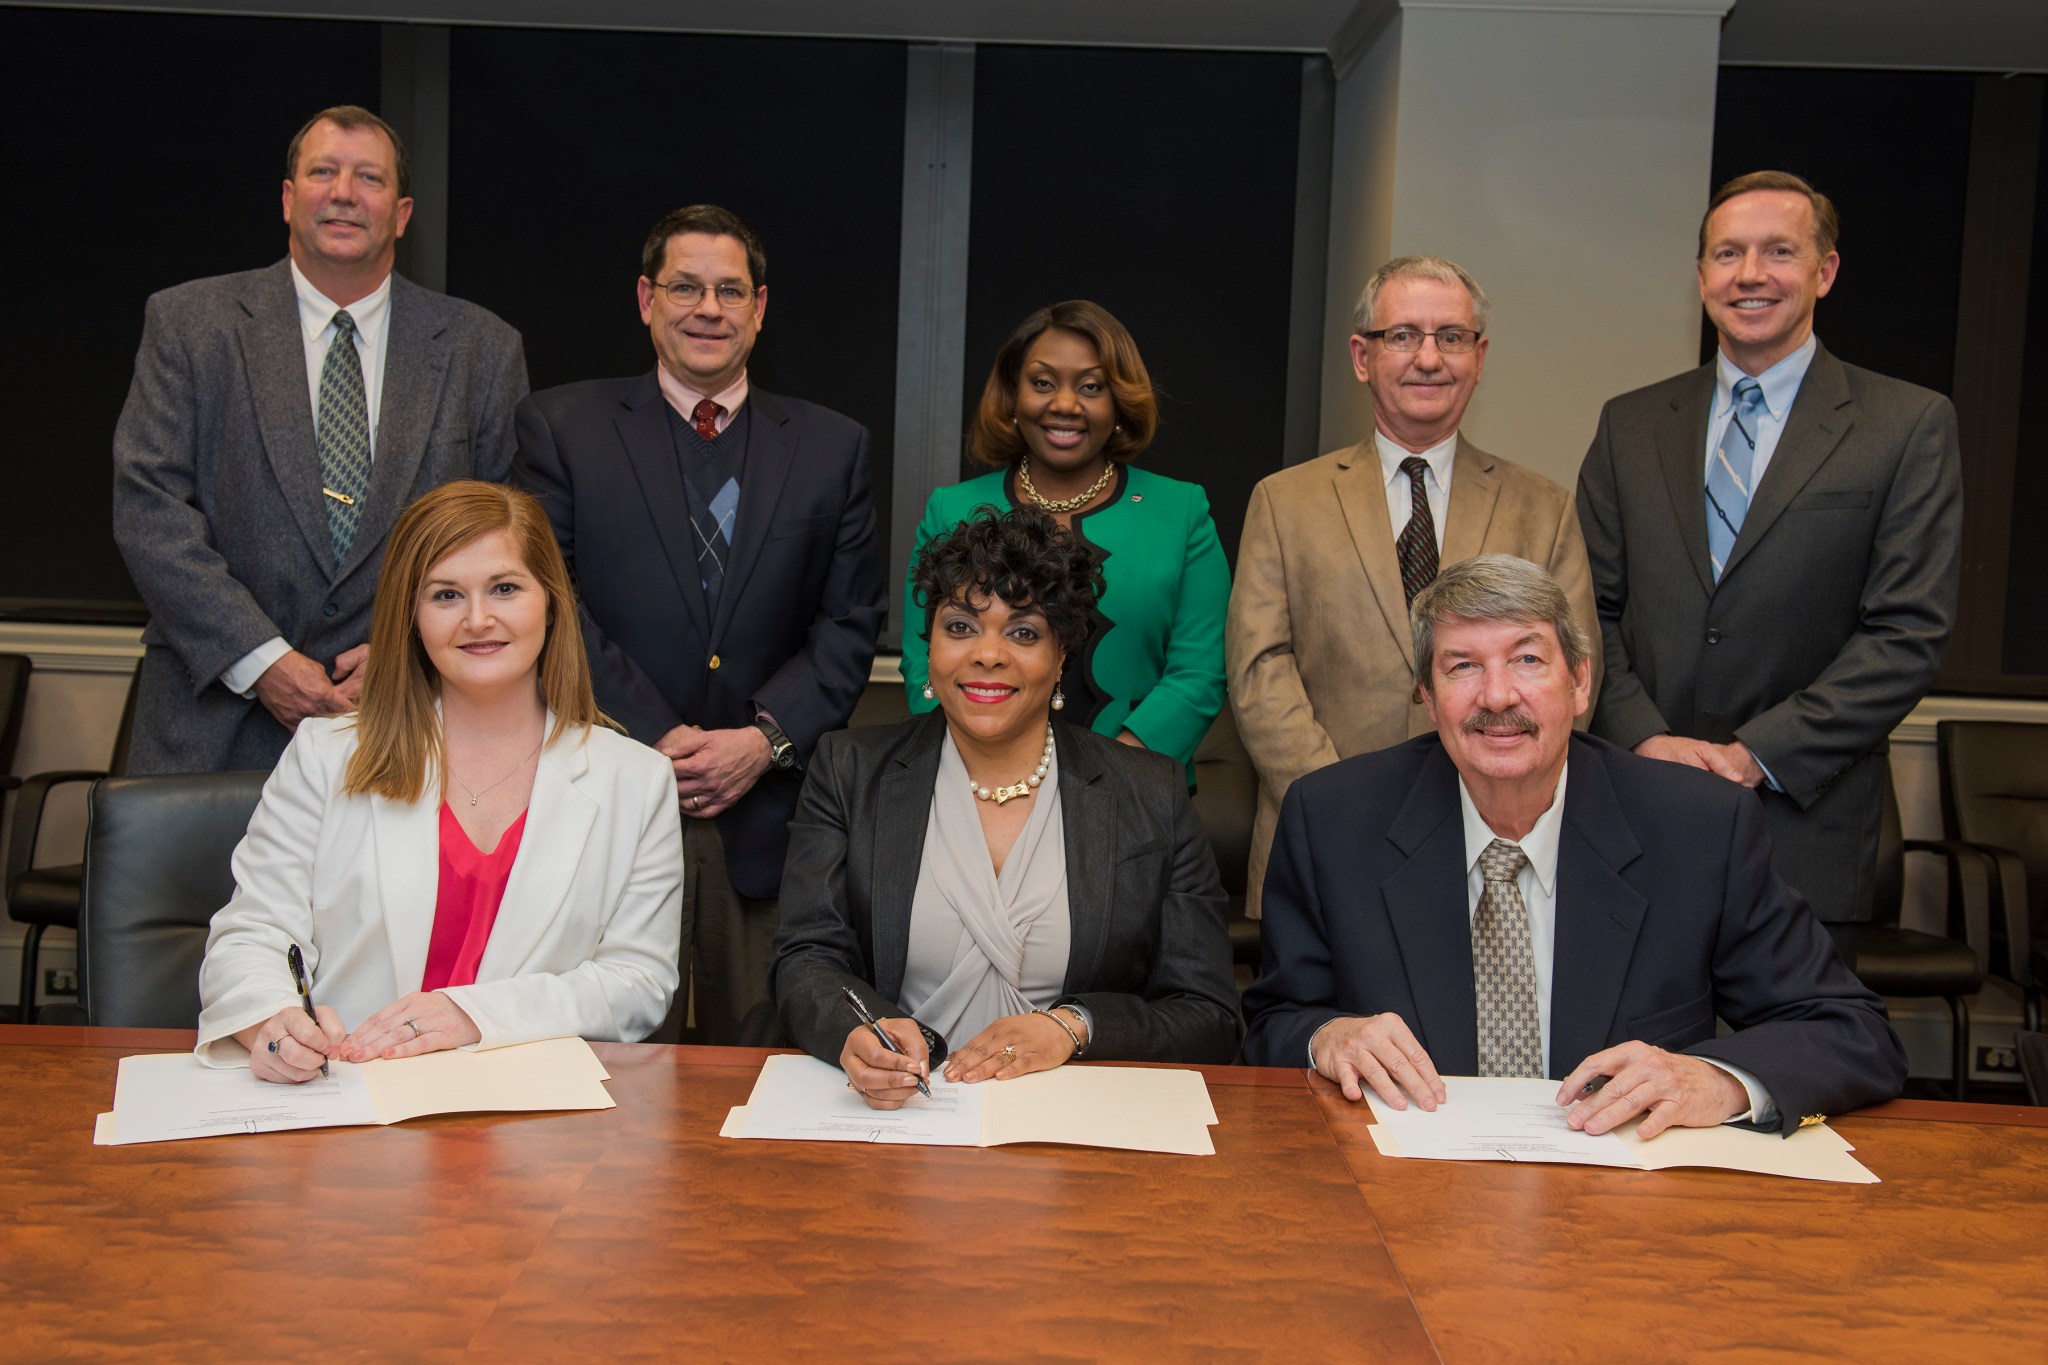 Executives from URS Federal Services, Inc., and Seabrook Solutions, LLC Inc. sign a NASA Mentor-Protégé Agreement on Feb. 18.